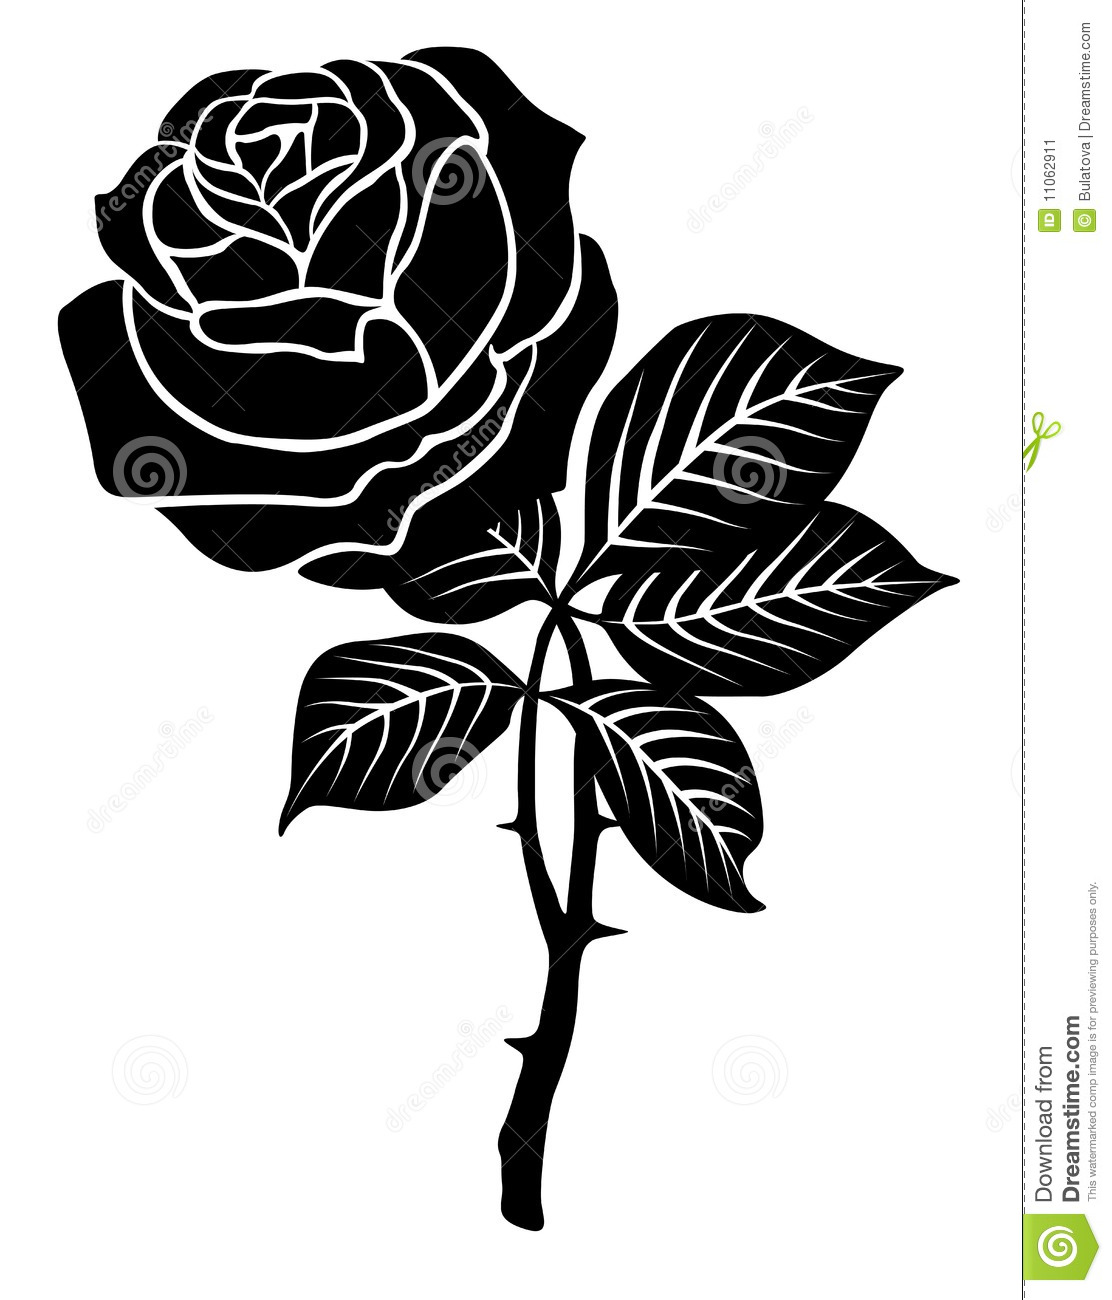 rose clipart silhouette - photo #40